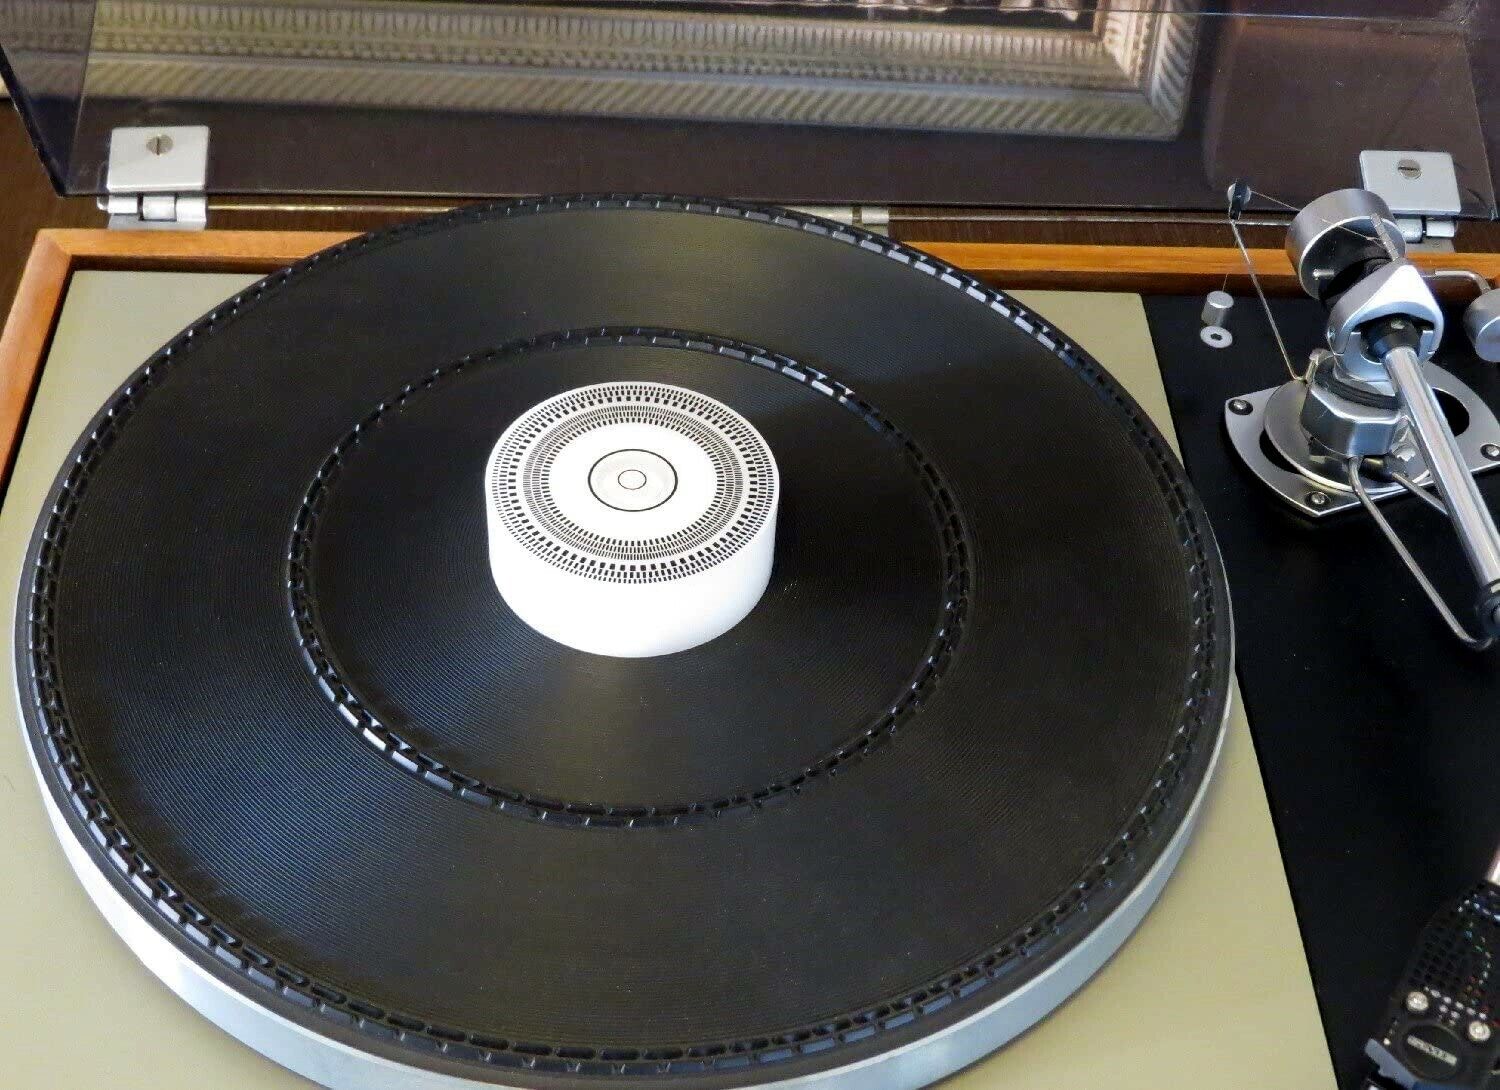 How To Use Strobe On Turntable